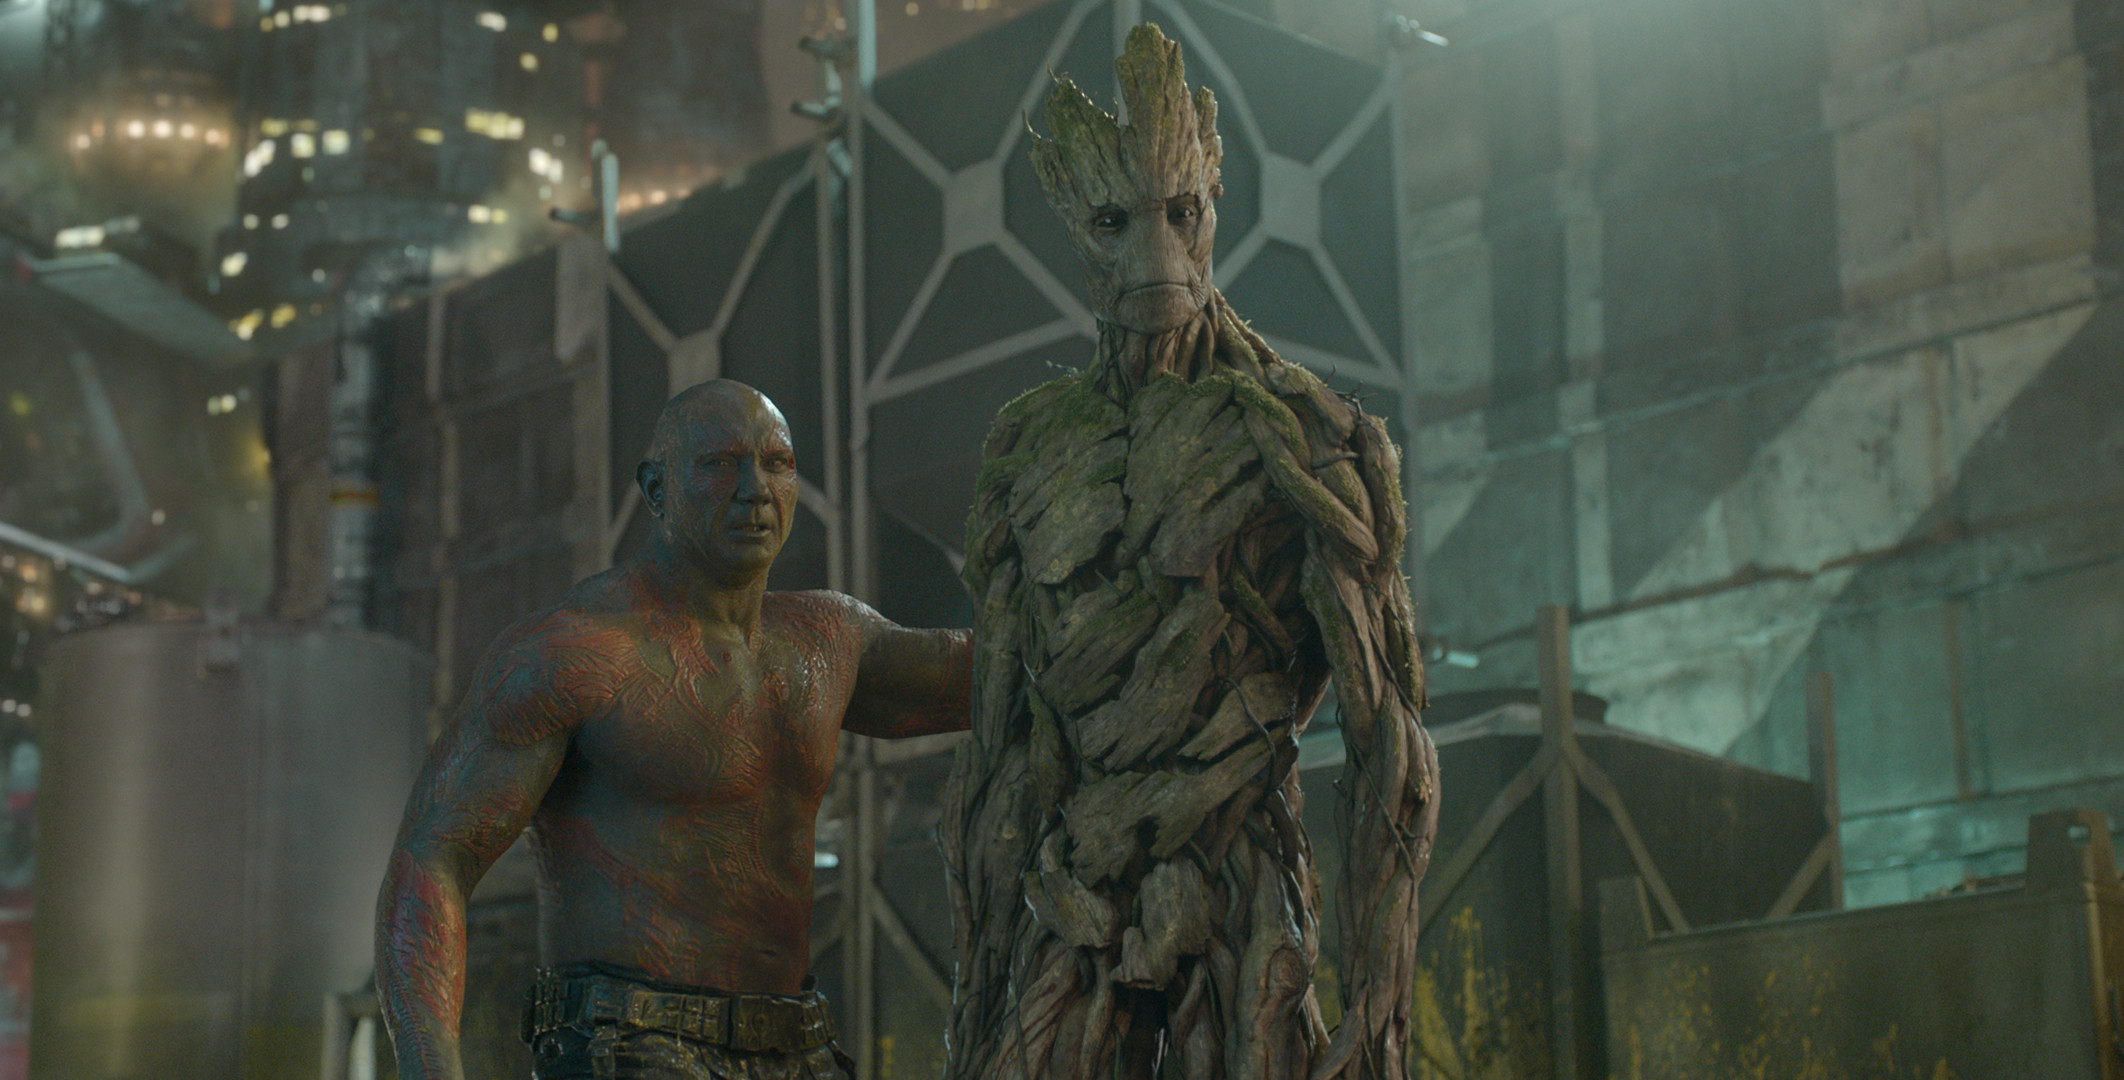 Movie Guardians of the Galaxy HD Wallpaper | Background Image